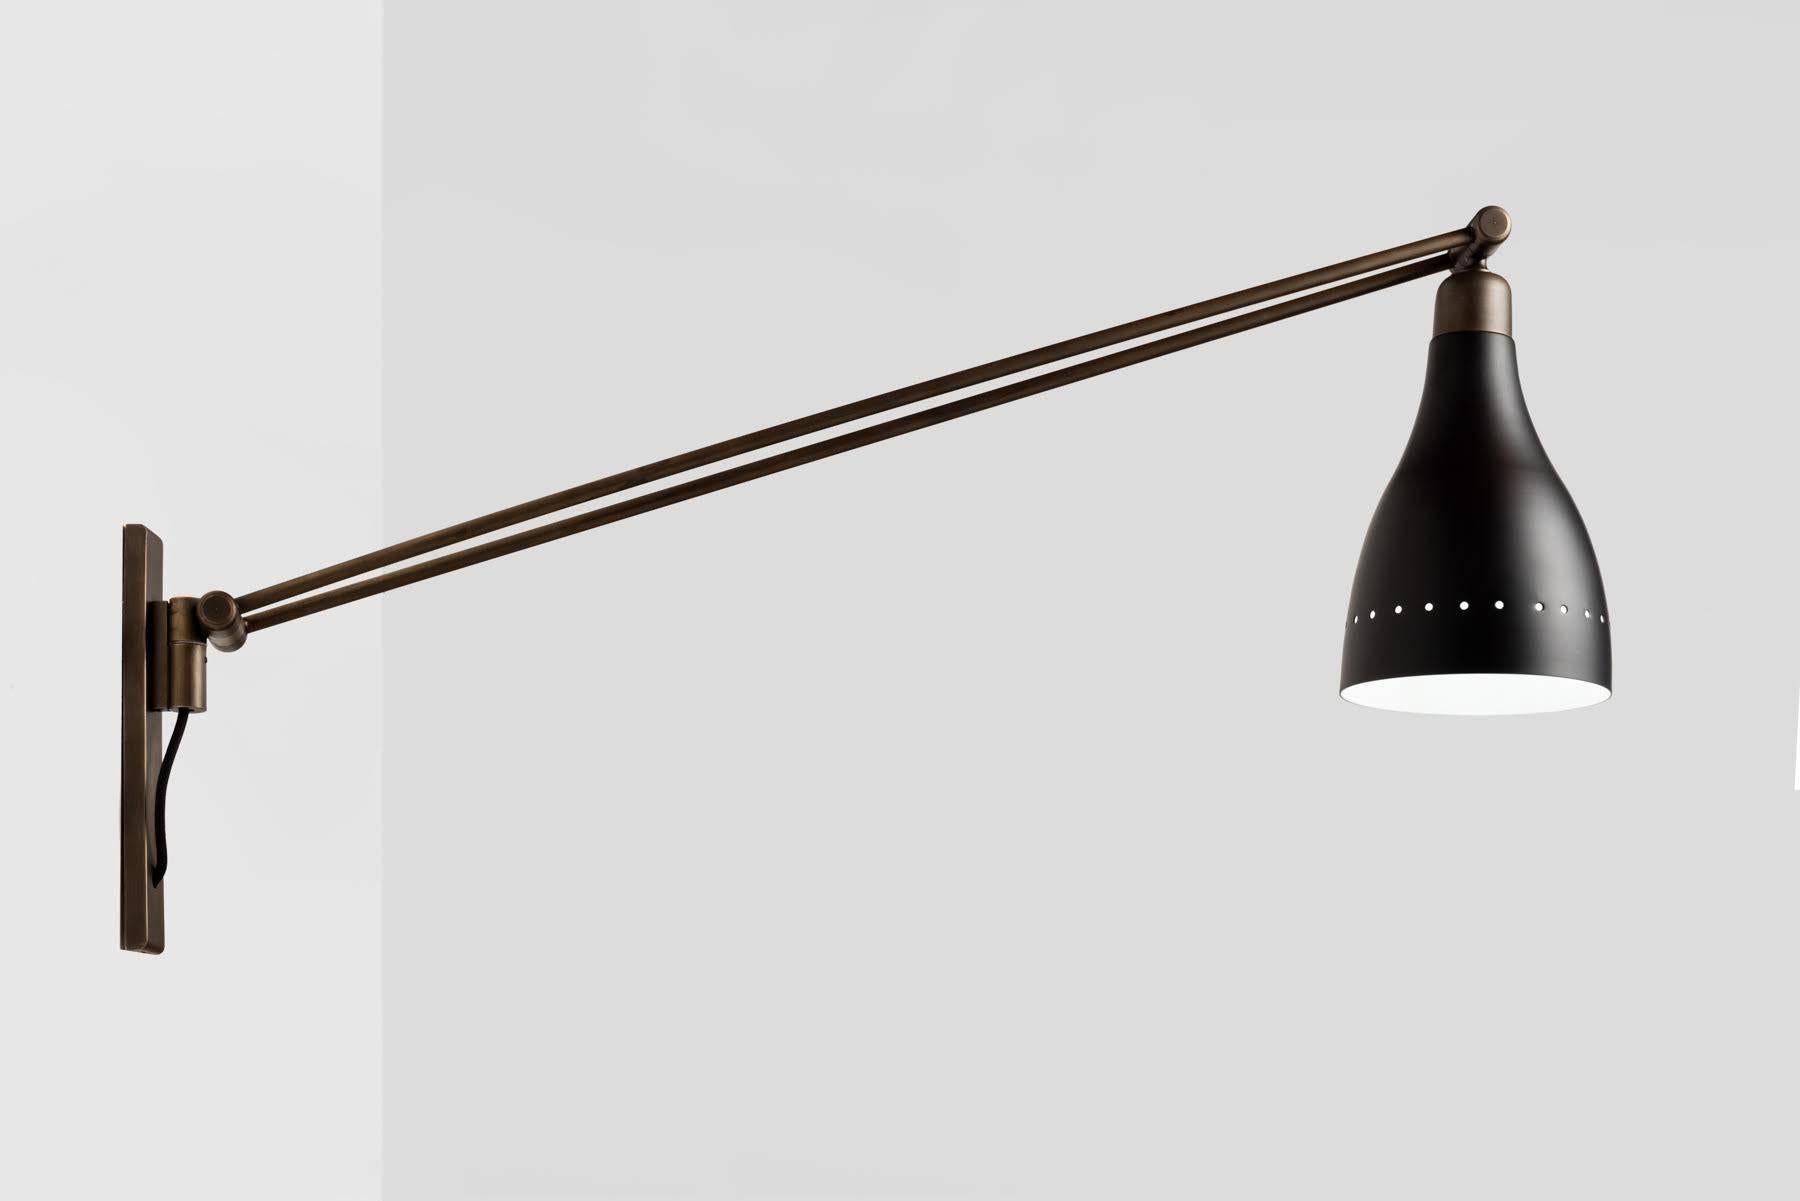 Black & Brass Modern Sconce, Italy, 21st Century

Arms rotate up and down, with additional movement at shade.

Measure: 6.5